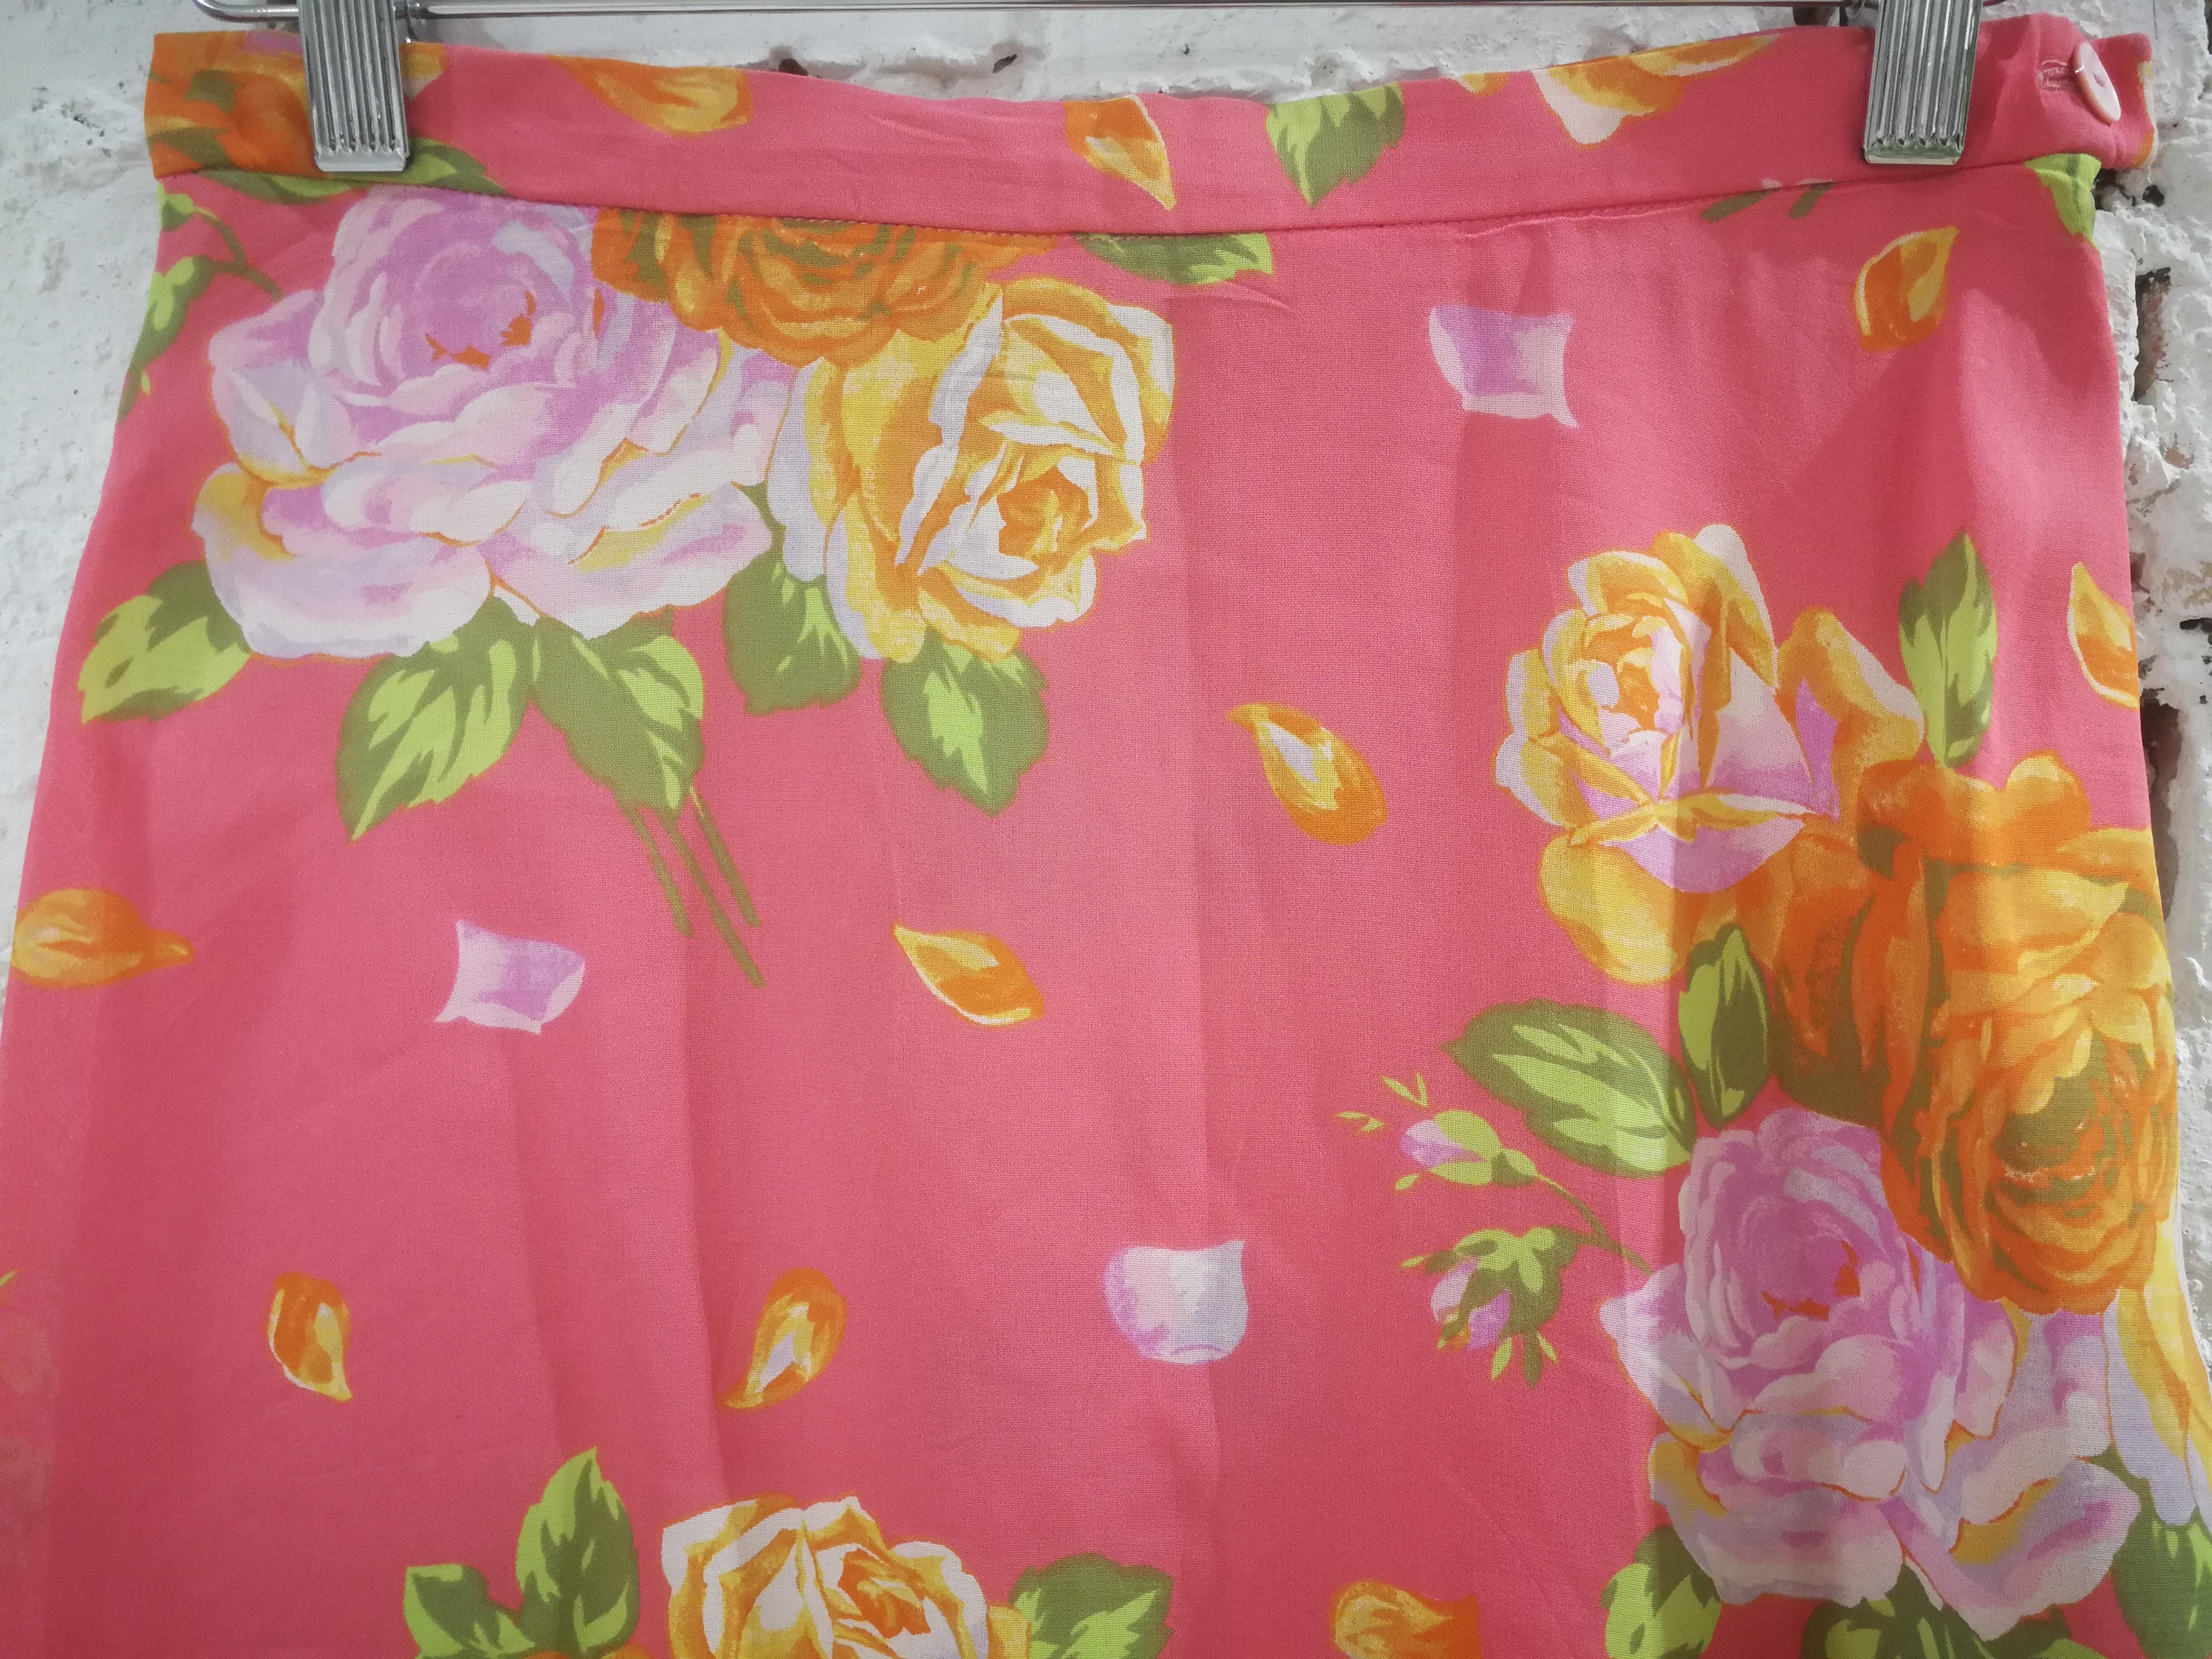 Kenzo Pink Skirt In Excellent Condition For Sale In Capri, IT